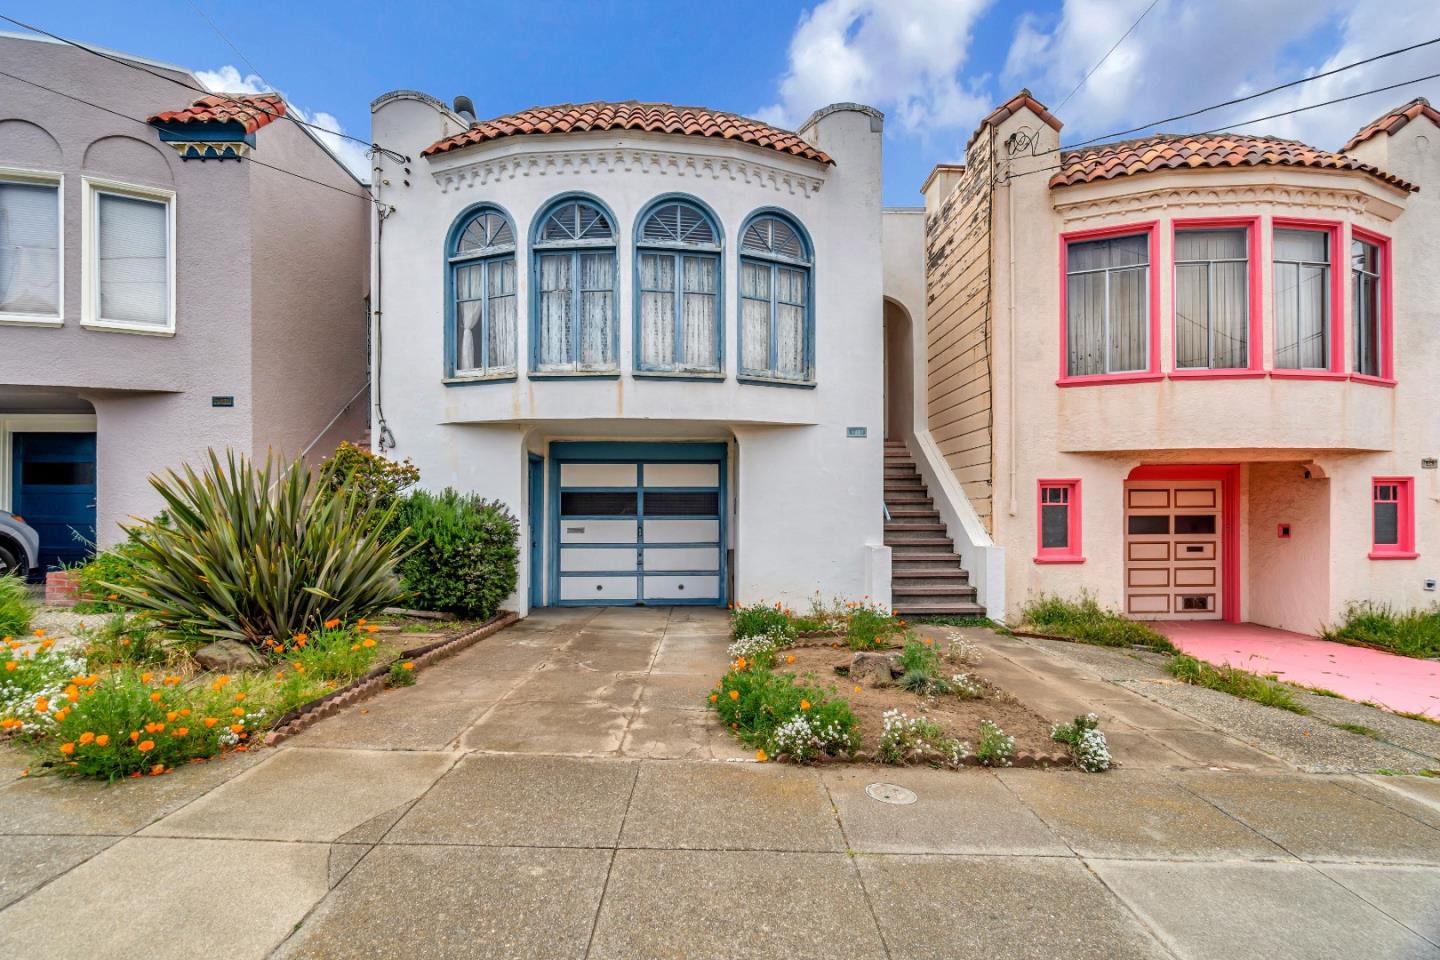 Photo of 1467 29th Ave in San Francisco, CA